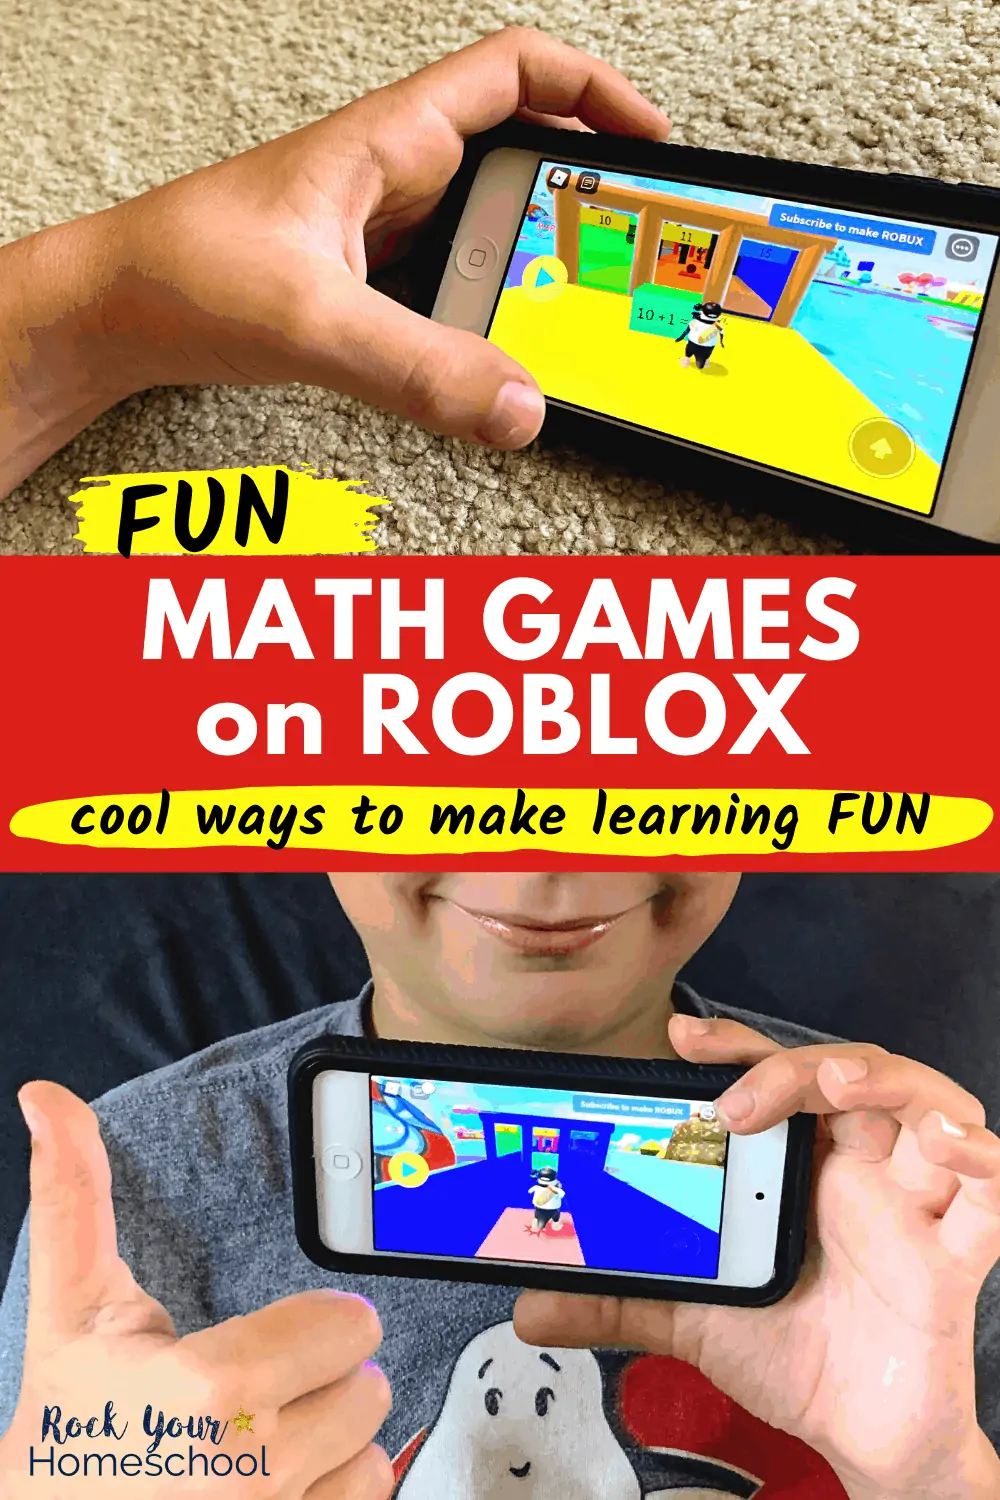 5 Remarkable Reasons You’ll Love These Fun Math Games for Kids on Roblox